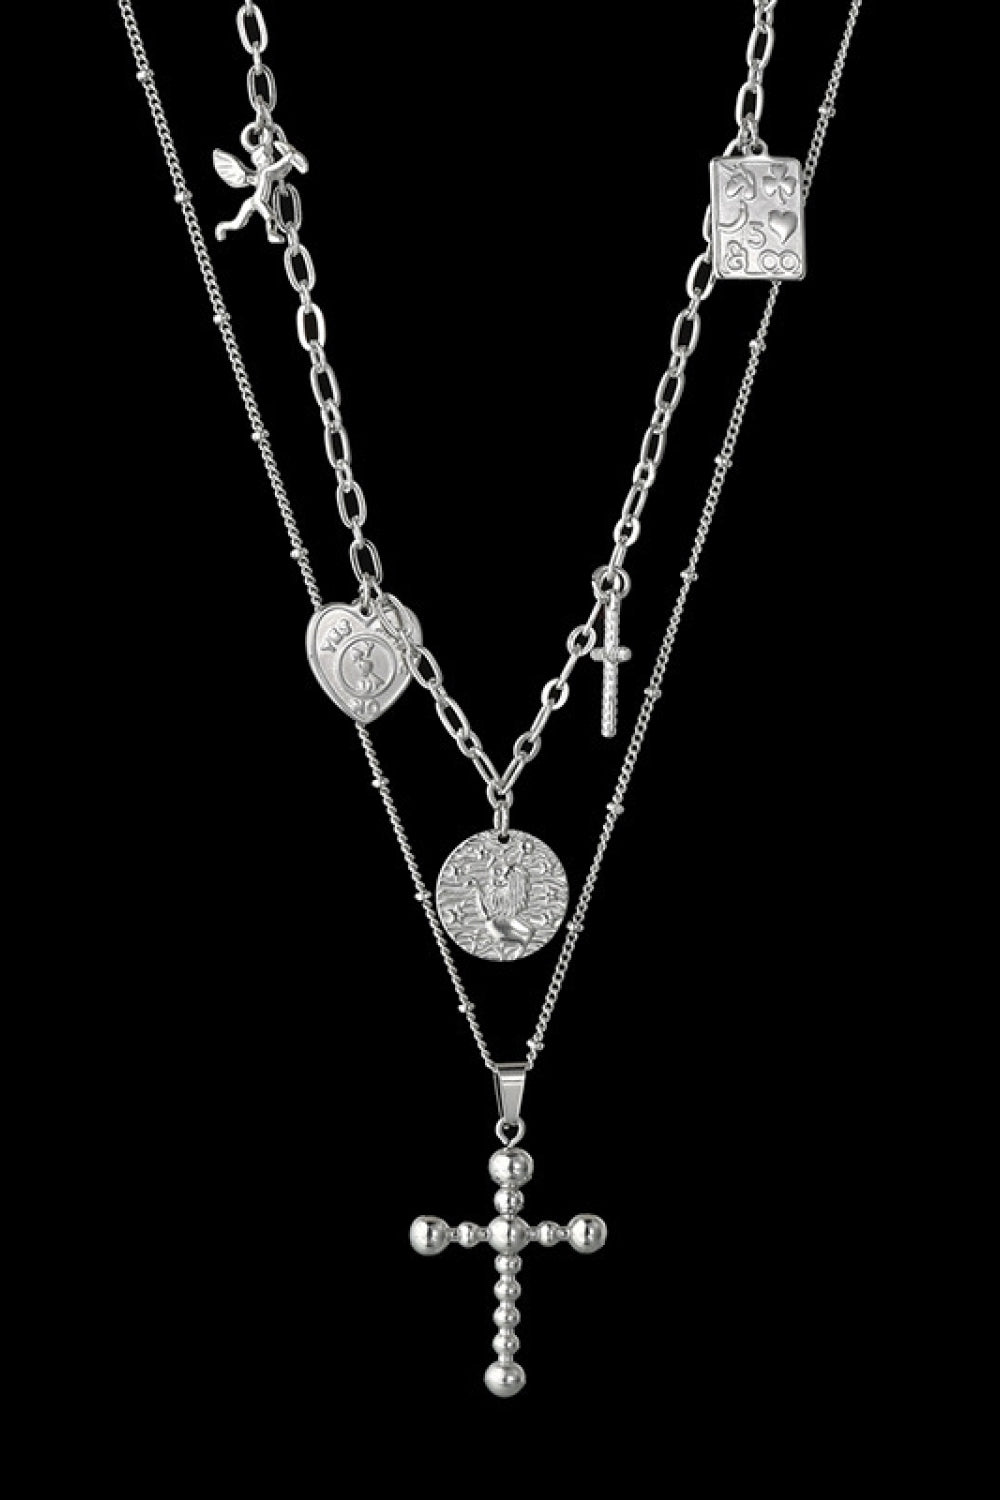 HK Stainless Steel Antique Coins & Cross Necklace